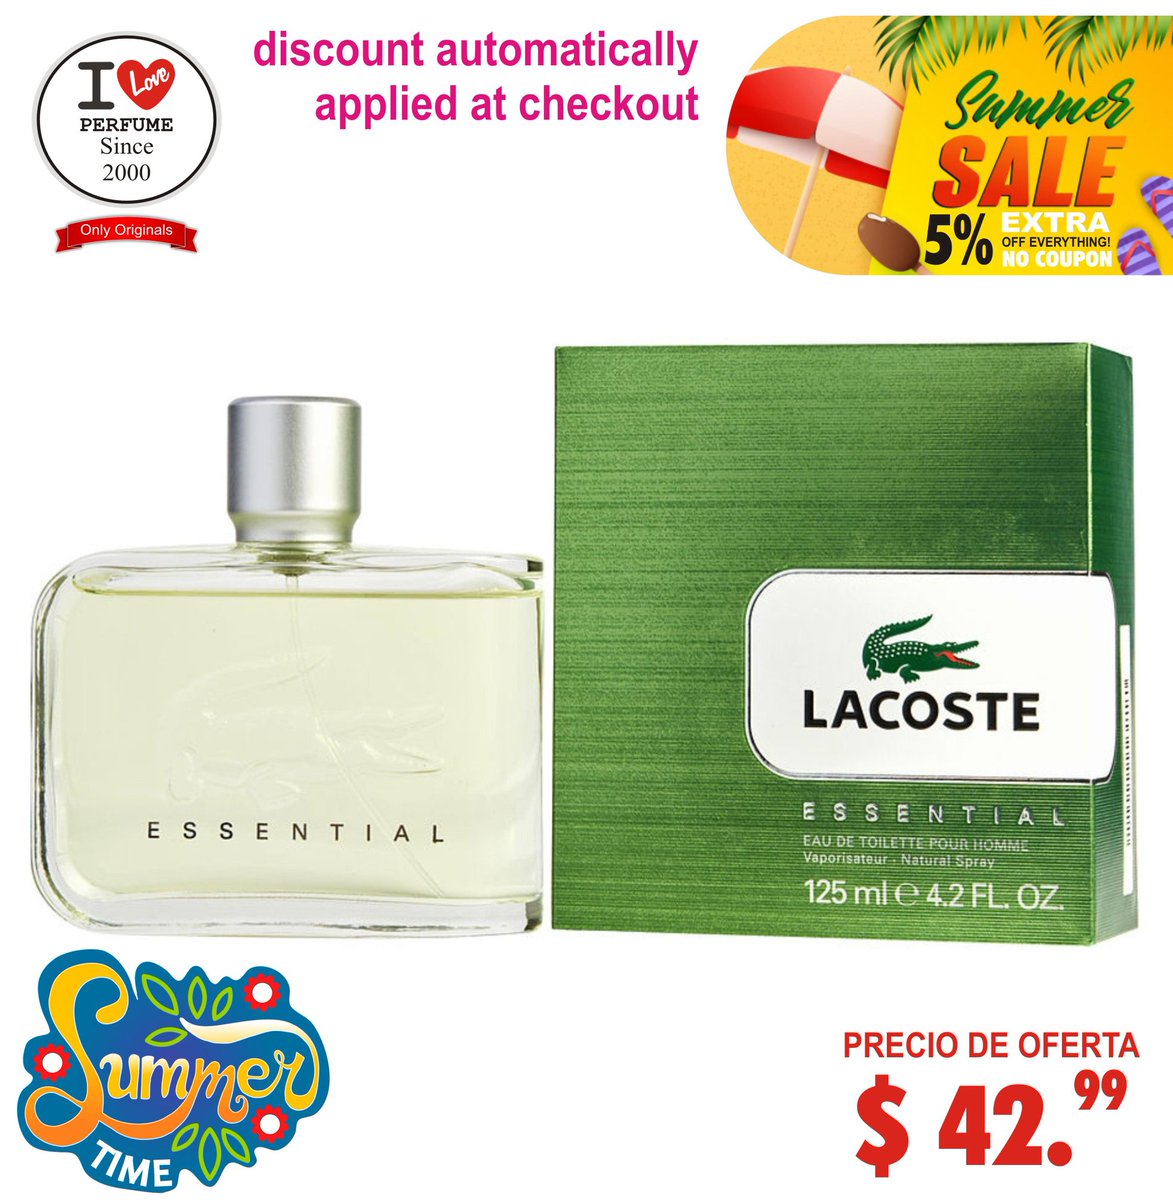 #LacosteEssential
by Lacoste Men Eau De Toilette 4.2 oz

#SUMMERSALES in #ILovePerfume #OFFERSNOCOUPONS
Visit our business website and buy your favorite perfume.
iloveperfume.us
#ManyNews #NoveltiesInPerfumes #Sale
#BigOffers #Novelties #SUMMERSALES